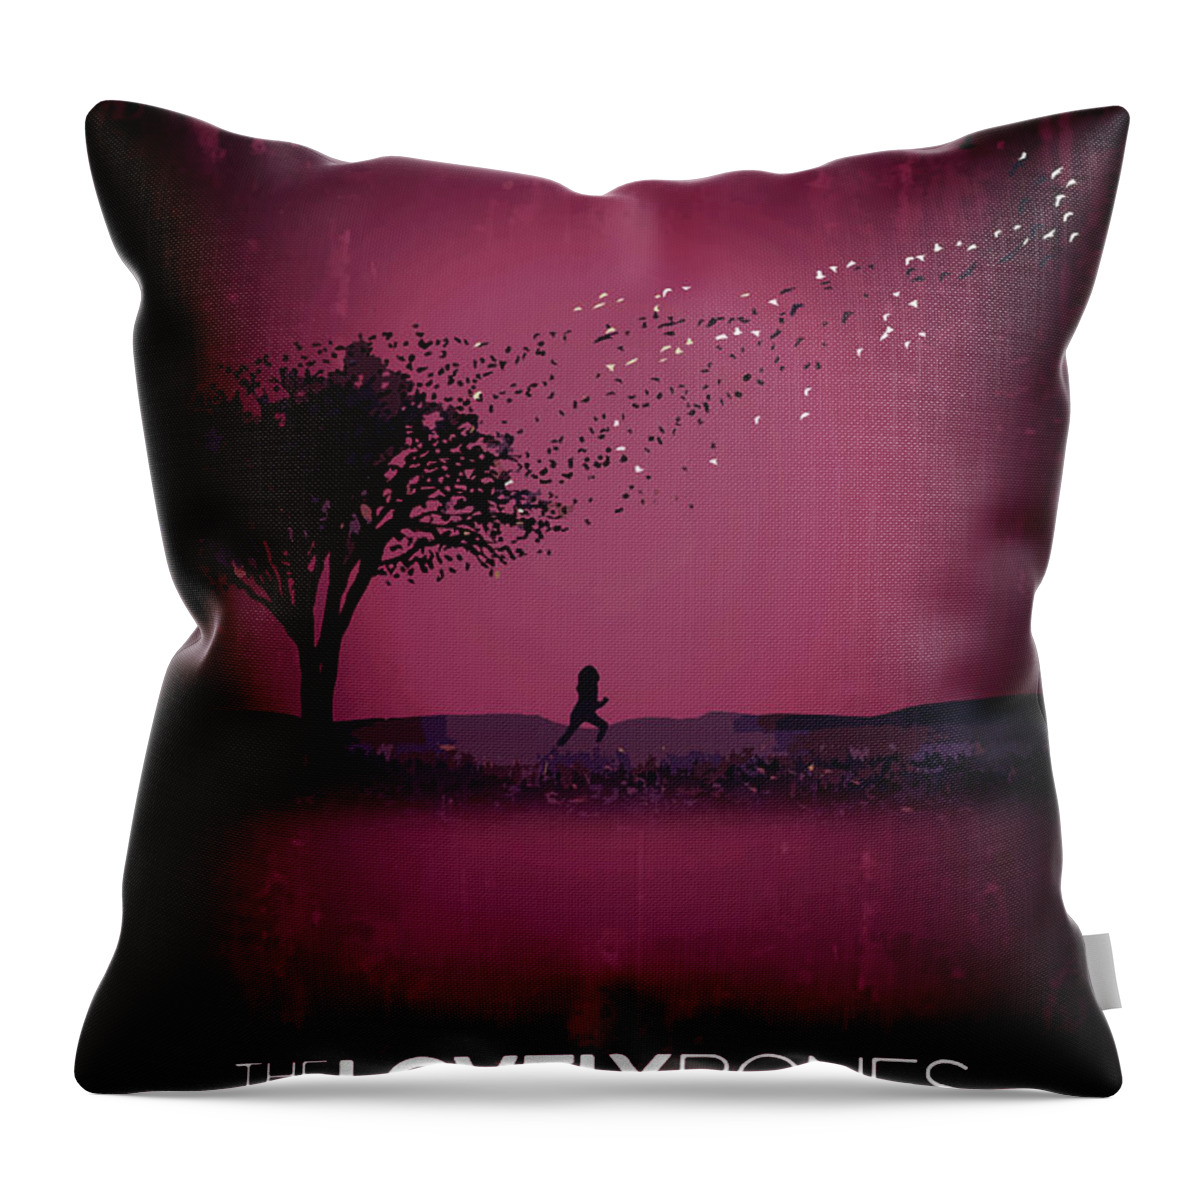 Movie Poster Throw Pillow featuring the digital art The Lovely Bones by Bo Kev